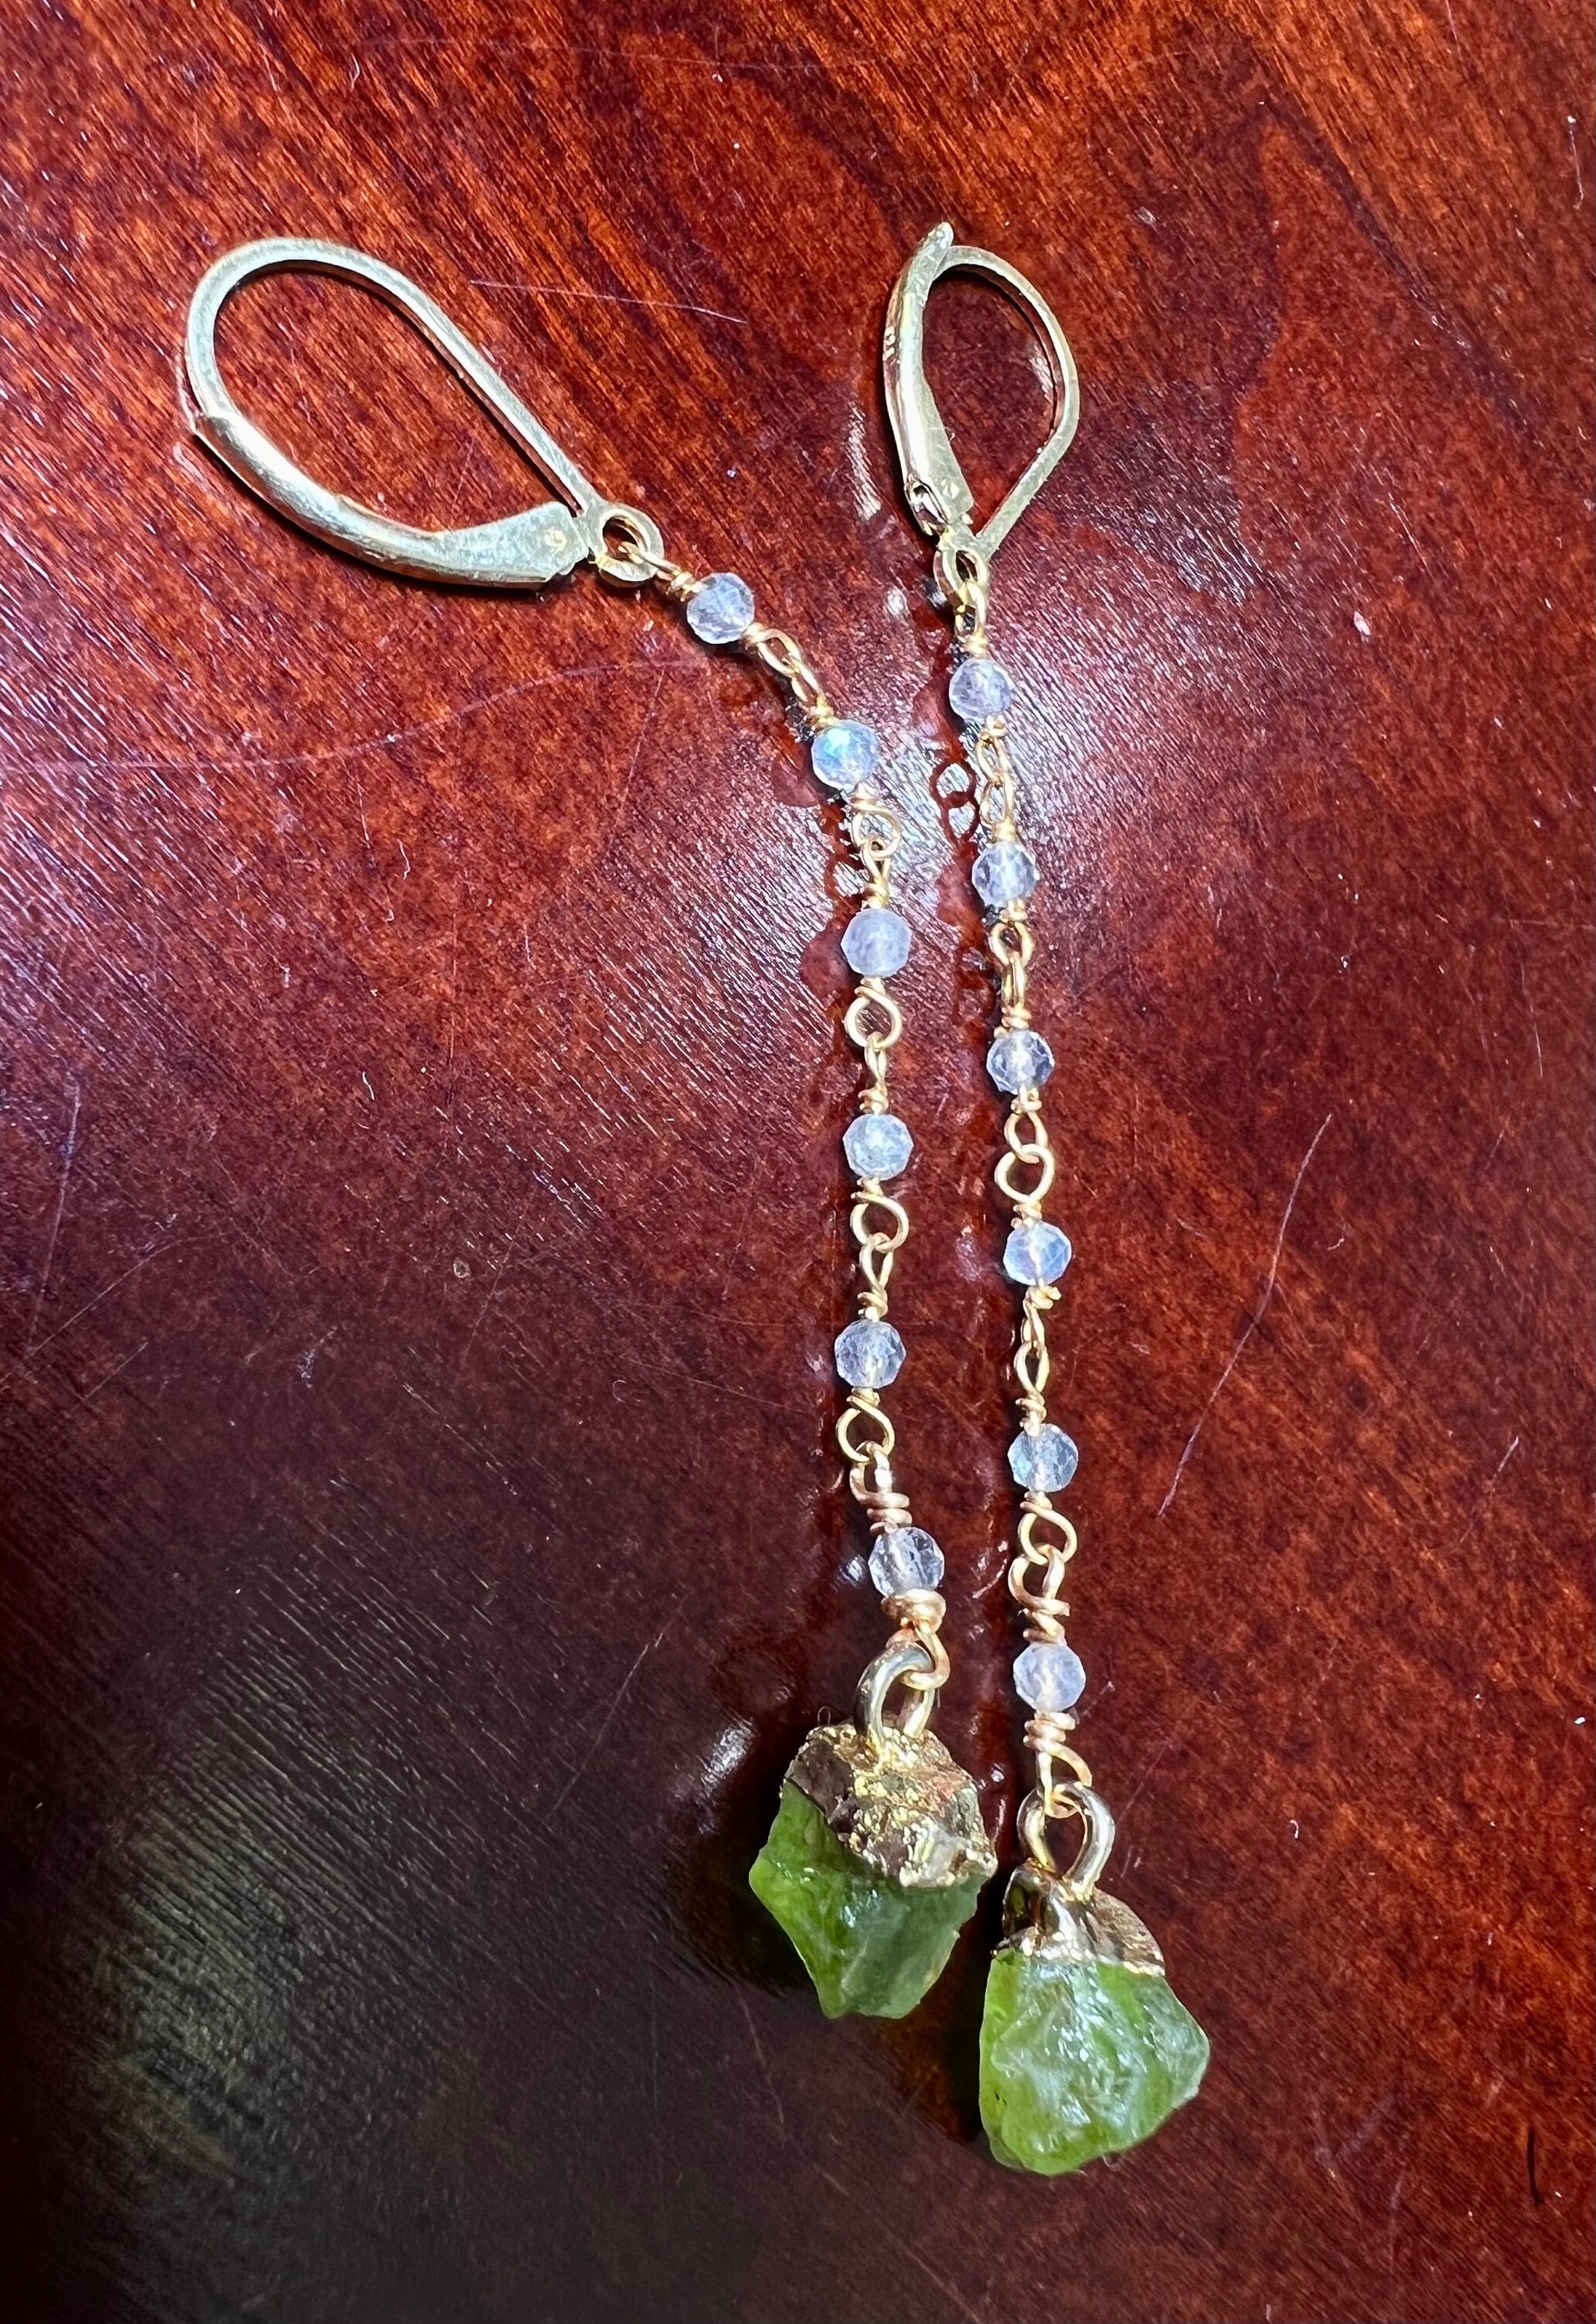 Raw Peridot 8mm dangling with labradorite faceted wire wrapped chain ,Long Earrings, 22k gold vermeil Gifts raw healing crystal